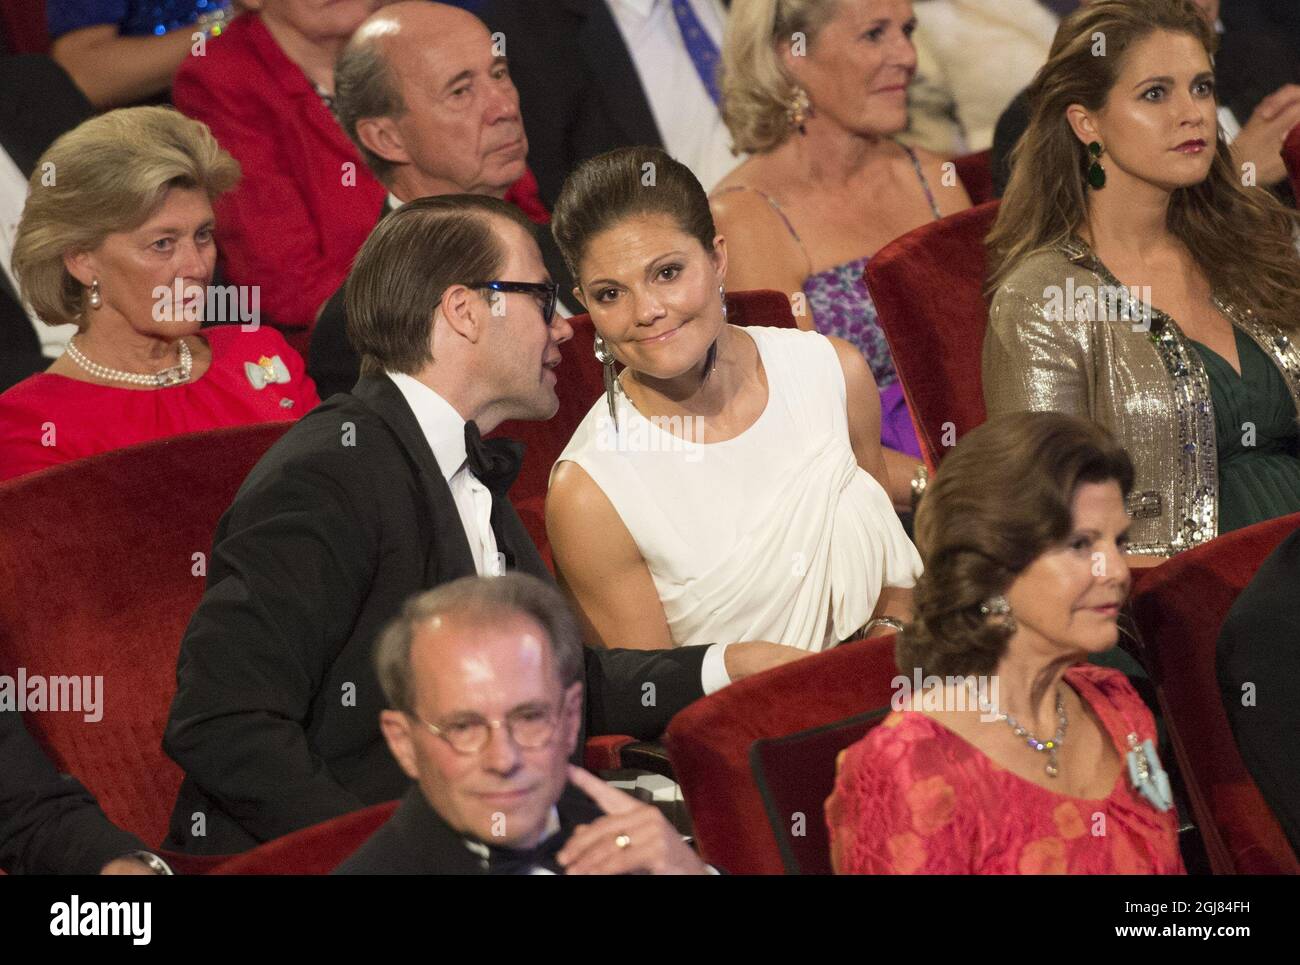 STOCKHOLM 20130914 Prince Daniel, Crown Princess Victoria, Princess Madeleine and in front of them Per Westerberg, Speaker of the Parliament and Queen Silvia at the Swedish Riksdag's jubilee concert in connection with The King's 40th jubilee, held at the Concert Hall in Stockholm September 14, 2013. Photo: Fredrik Sandberg / SCANPIX / Kod 10080  Stock Photo